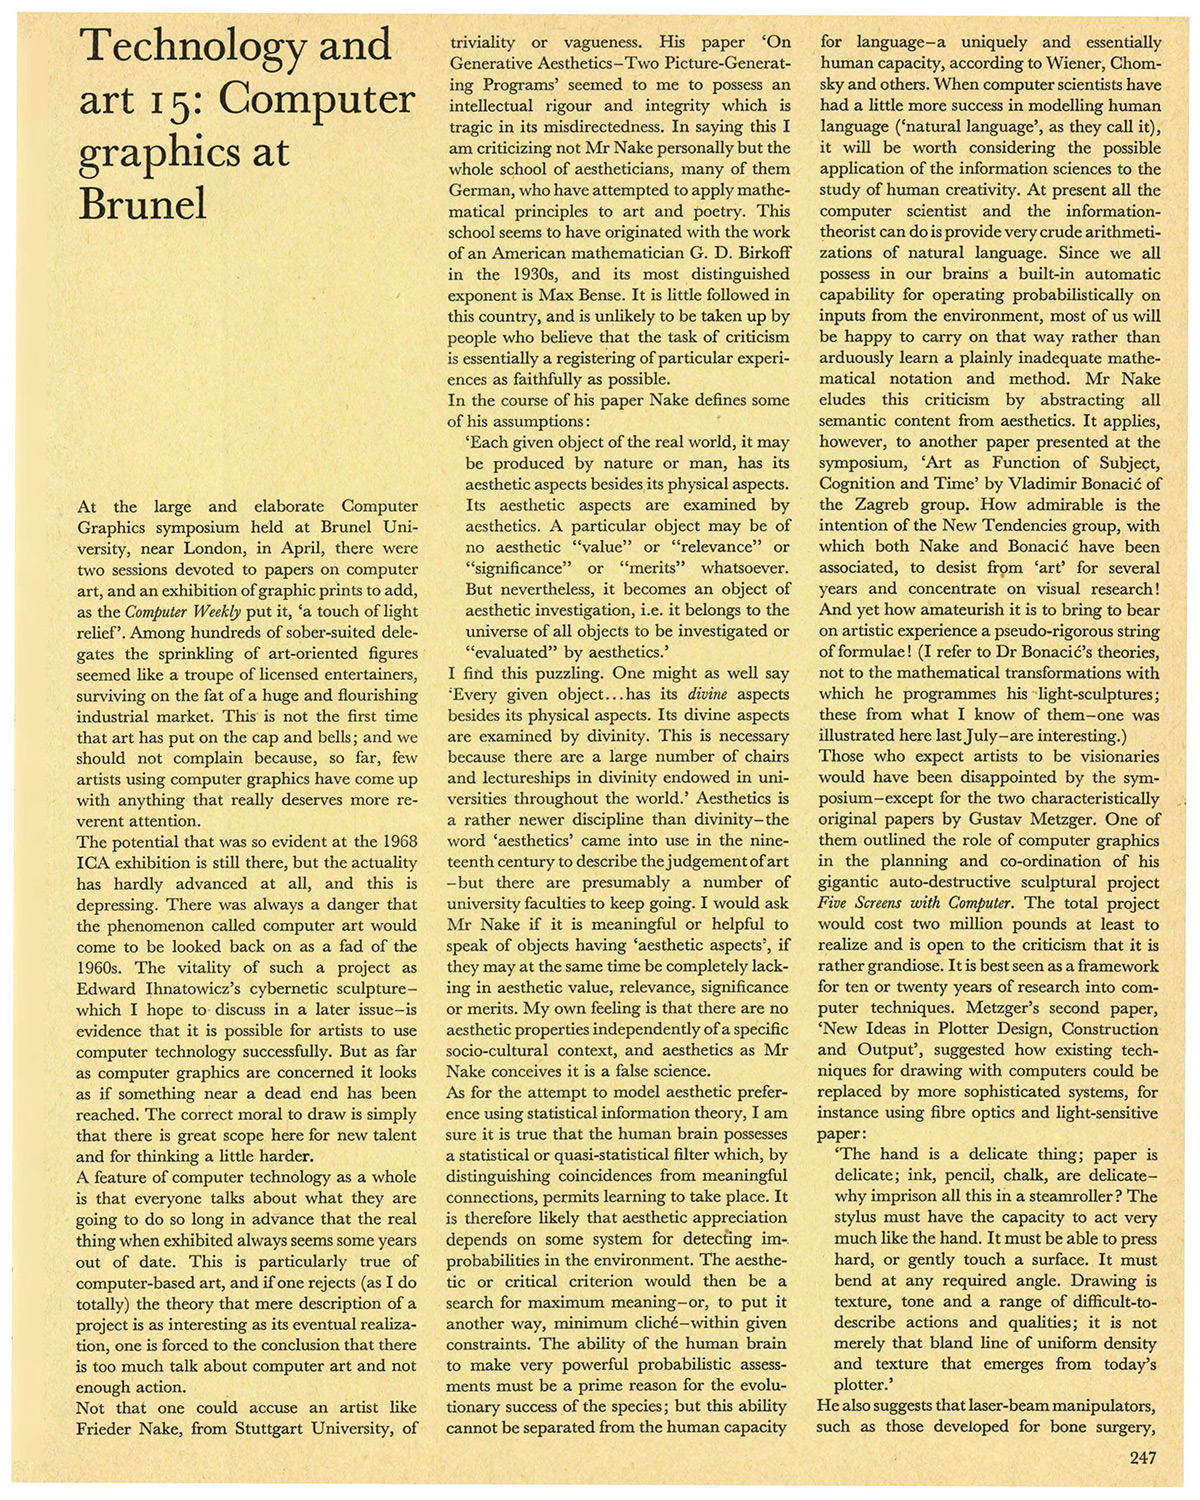 Technology and art 15: Computer graphics at Brunel. Studio International, Vol 179, No 923, June 1970, page 247.